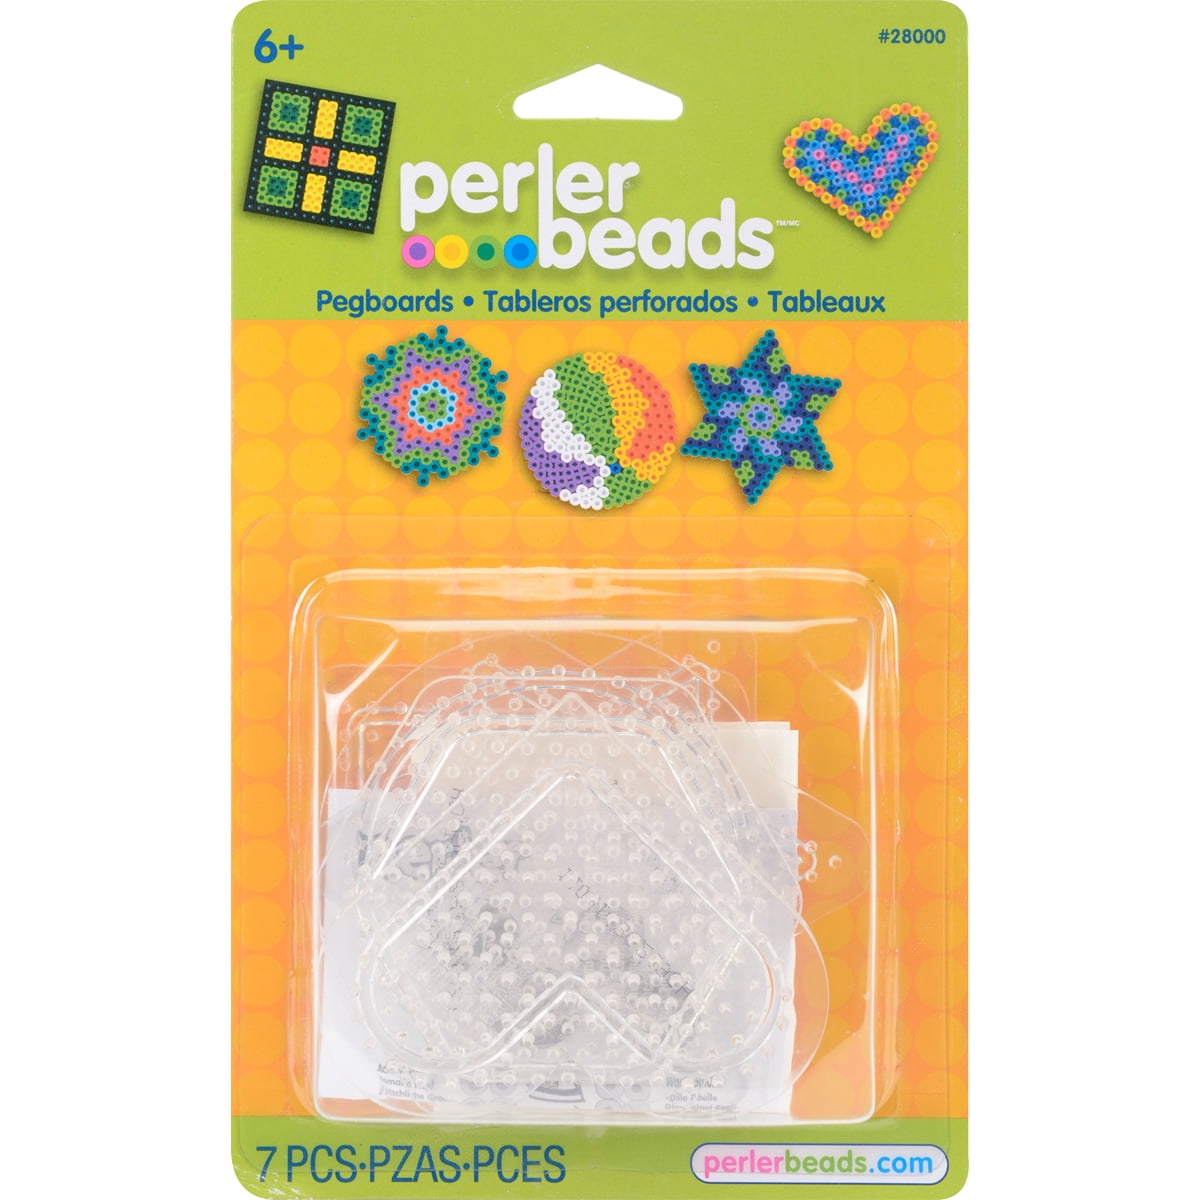 1 Set 16pcs 5mm Fuse Beads Pegboards Small Fuse Beads Boards 16pcs Patterns Clear Plastic Template,2 Blue Beads Tweezers,10 Hang Ropes,10 Key Chains